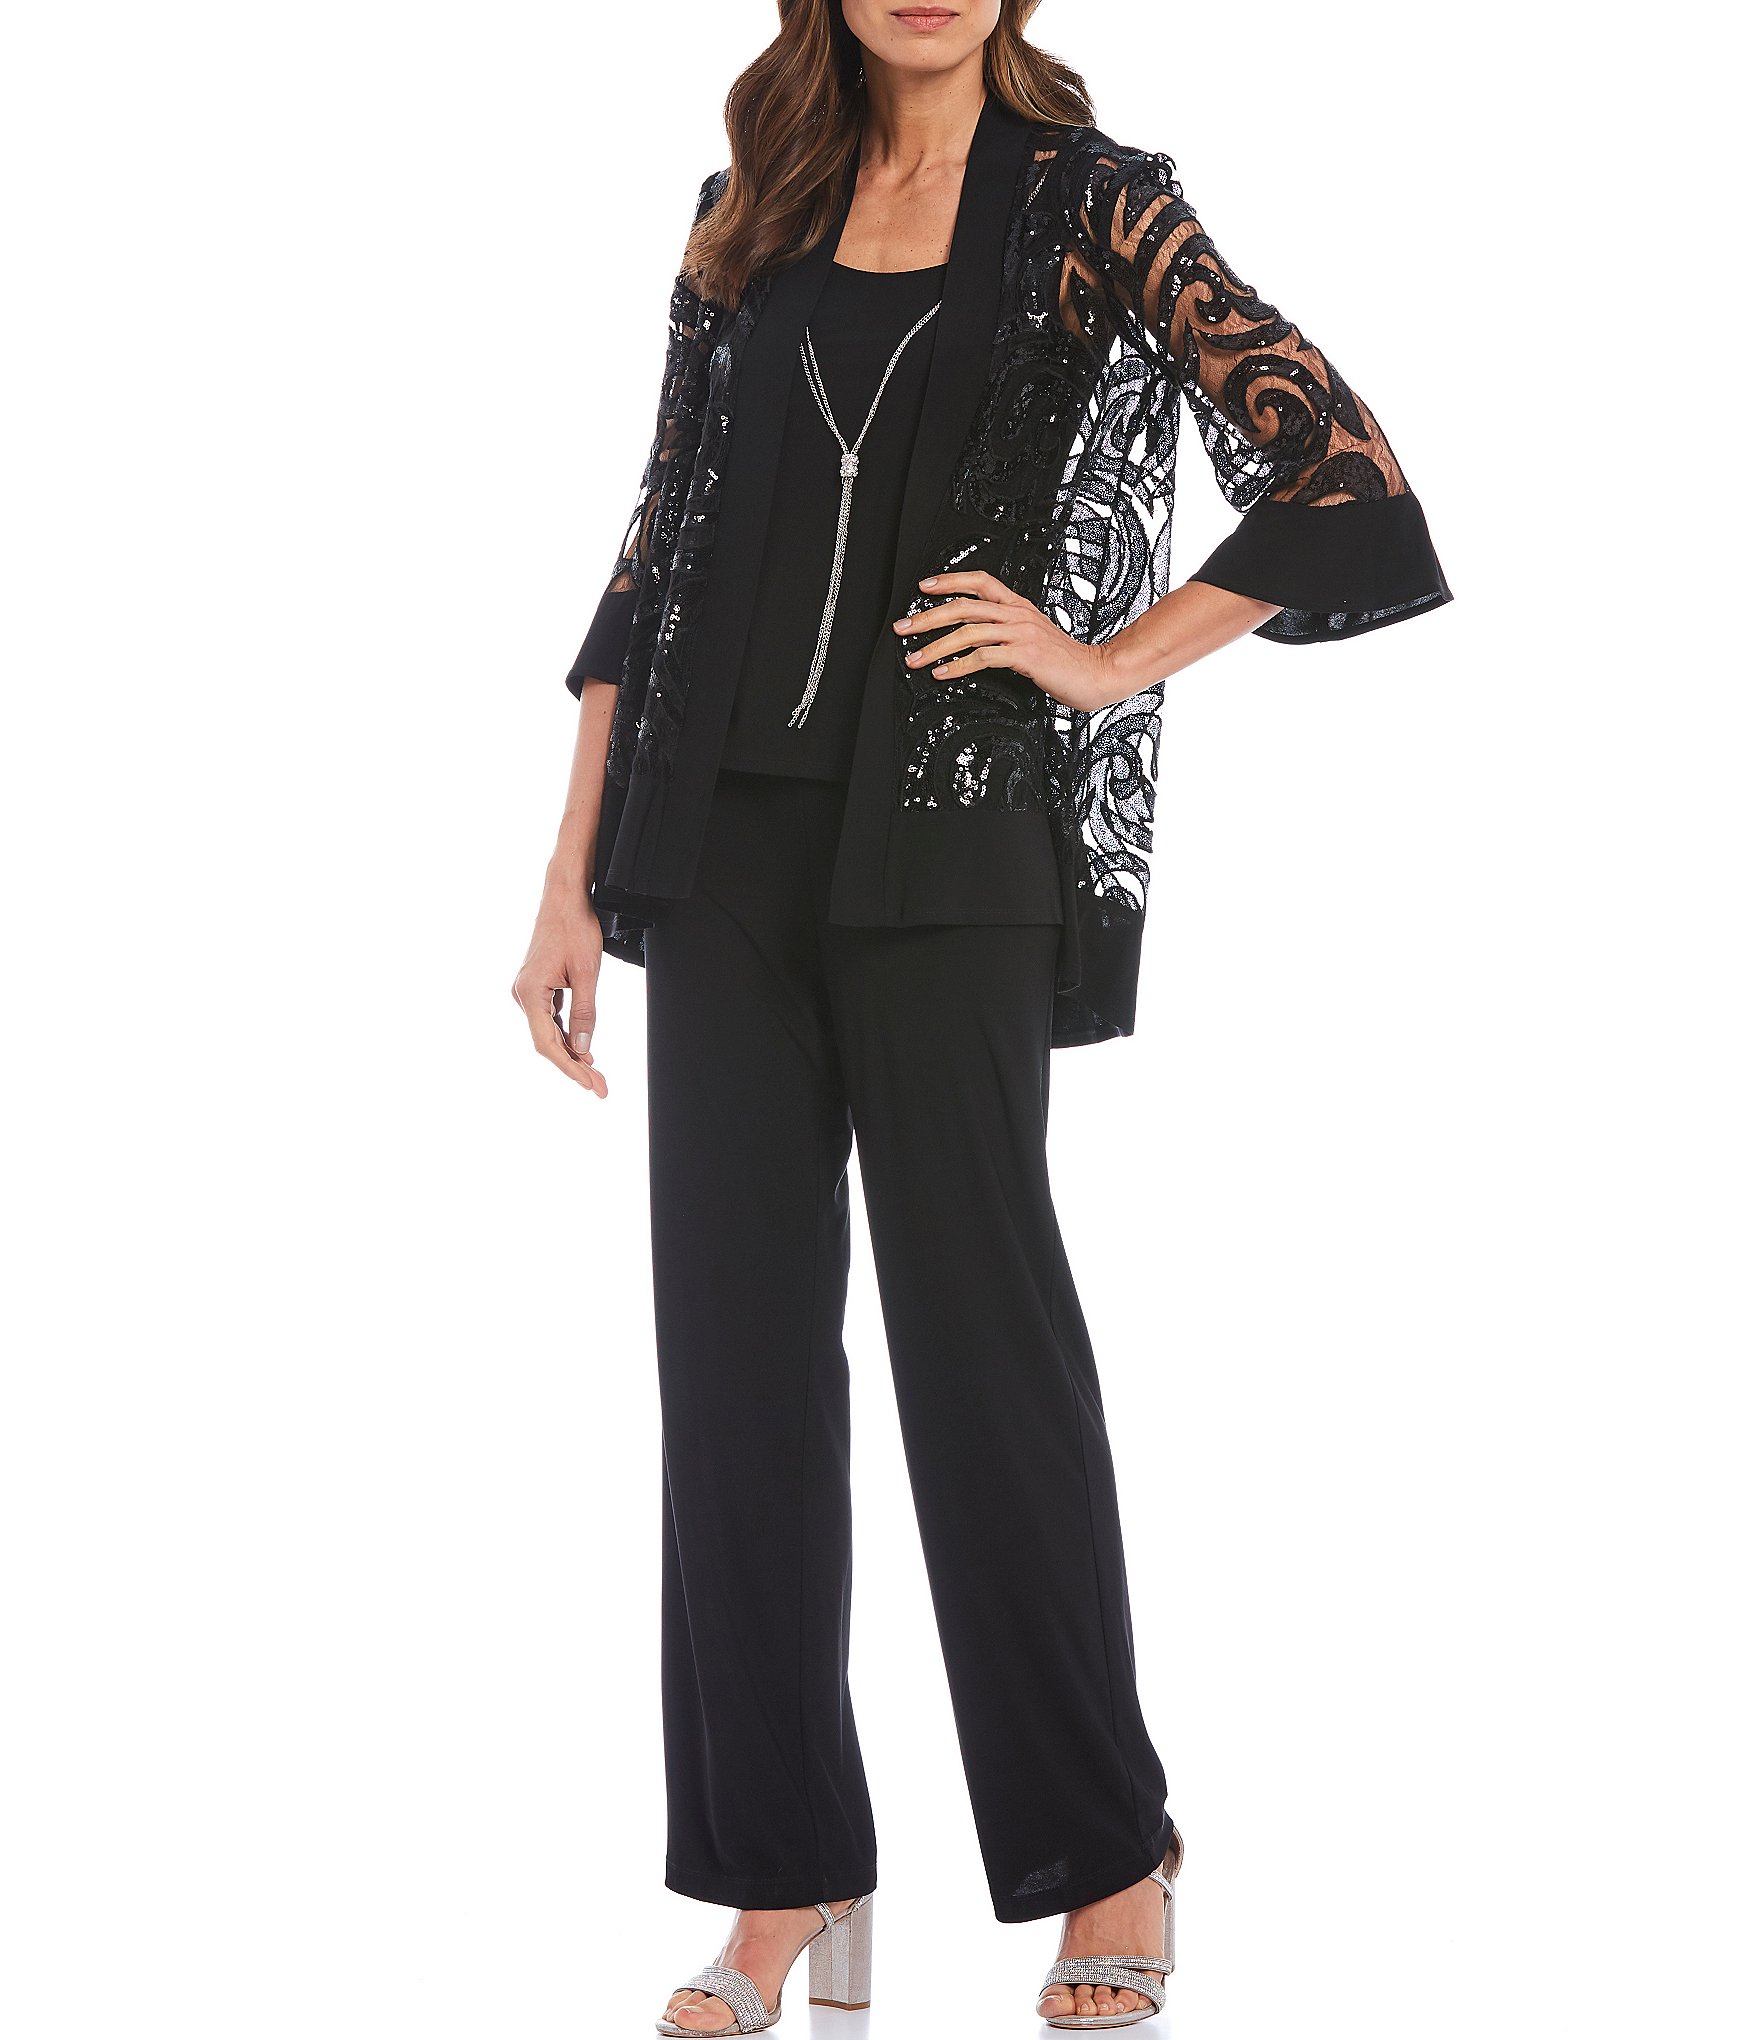 Plus Size Women's Three-Piece Beaded Pant Set by Roaman's in